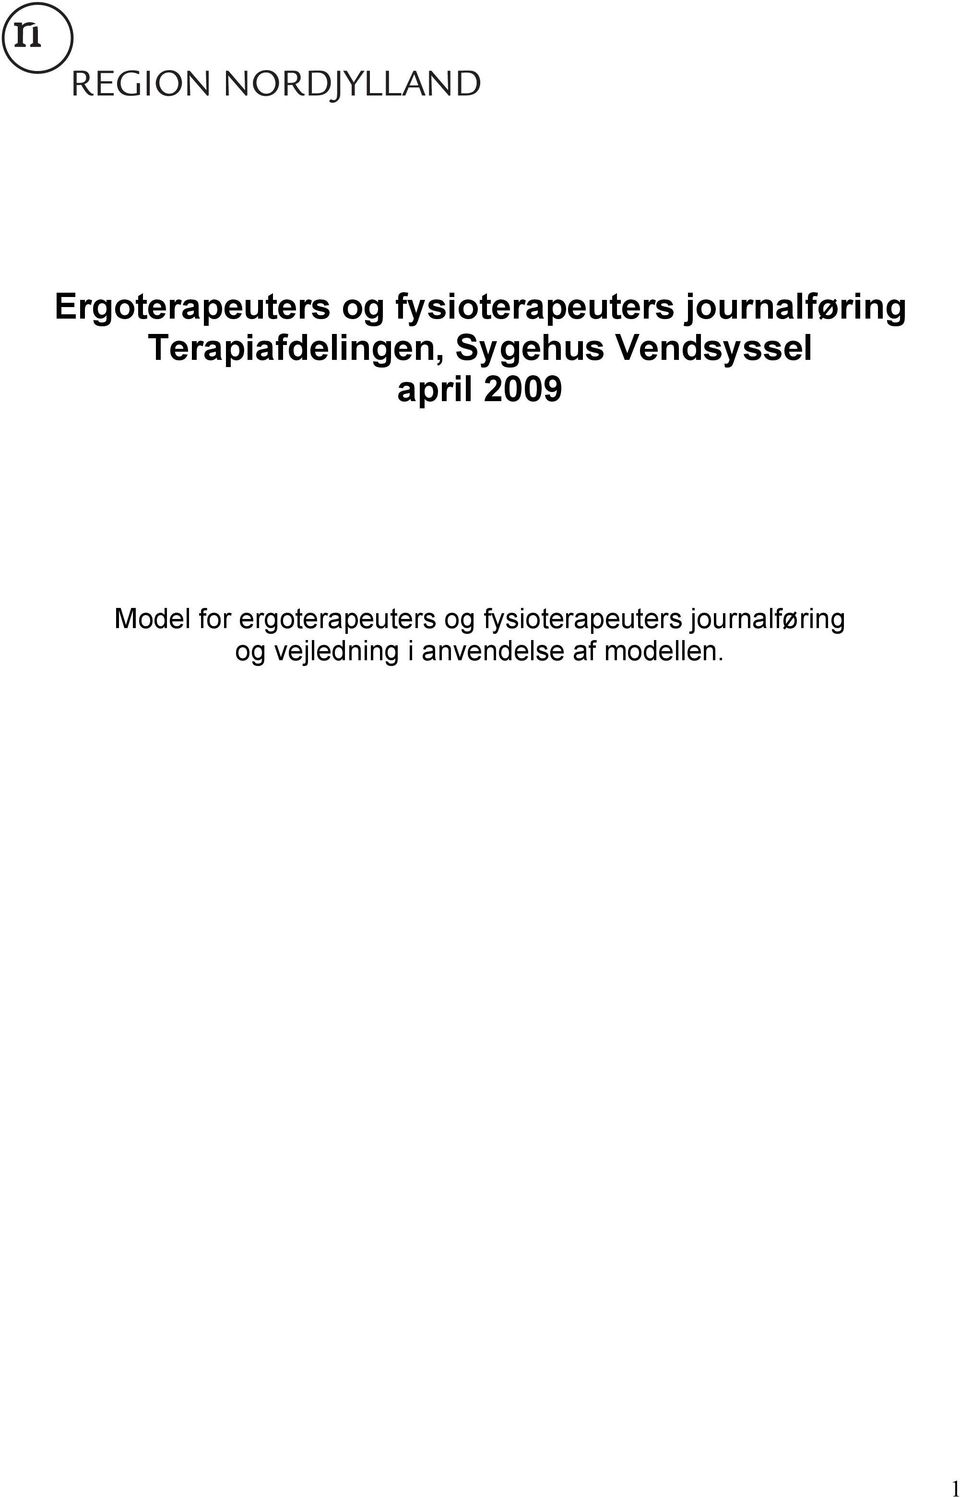 Model for ergoterapeuters og fysioterapeuters